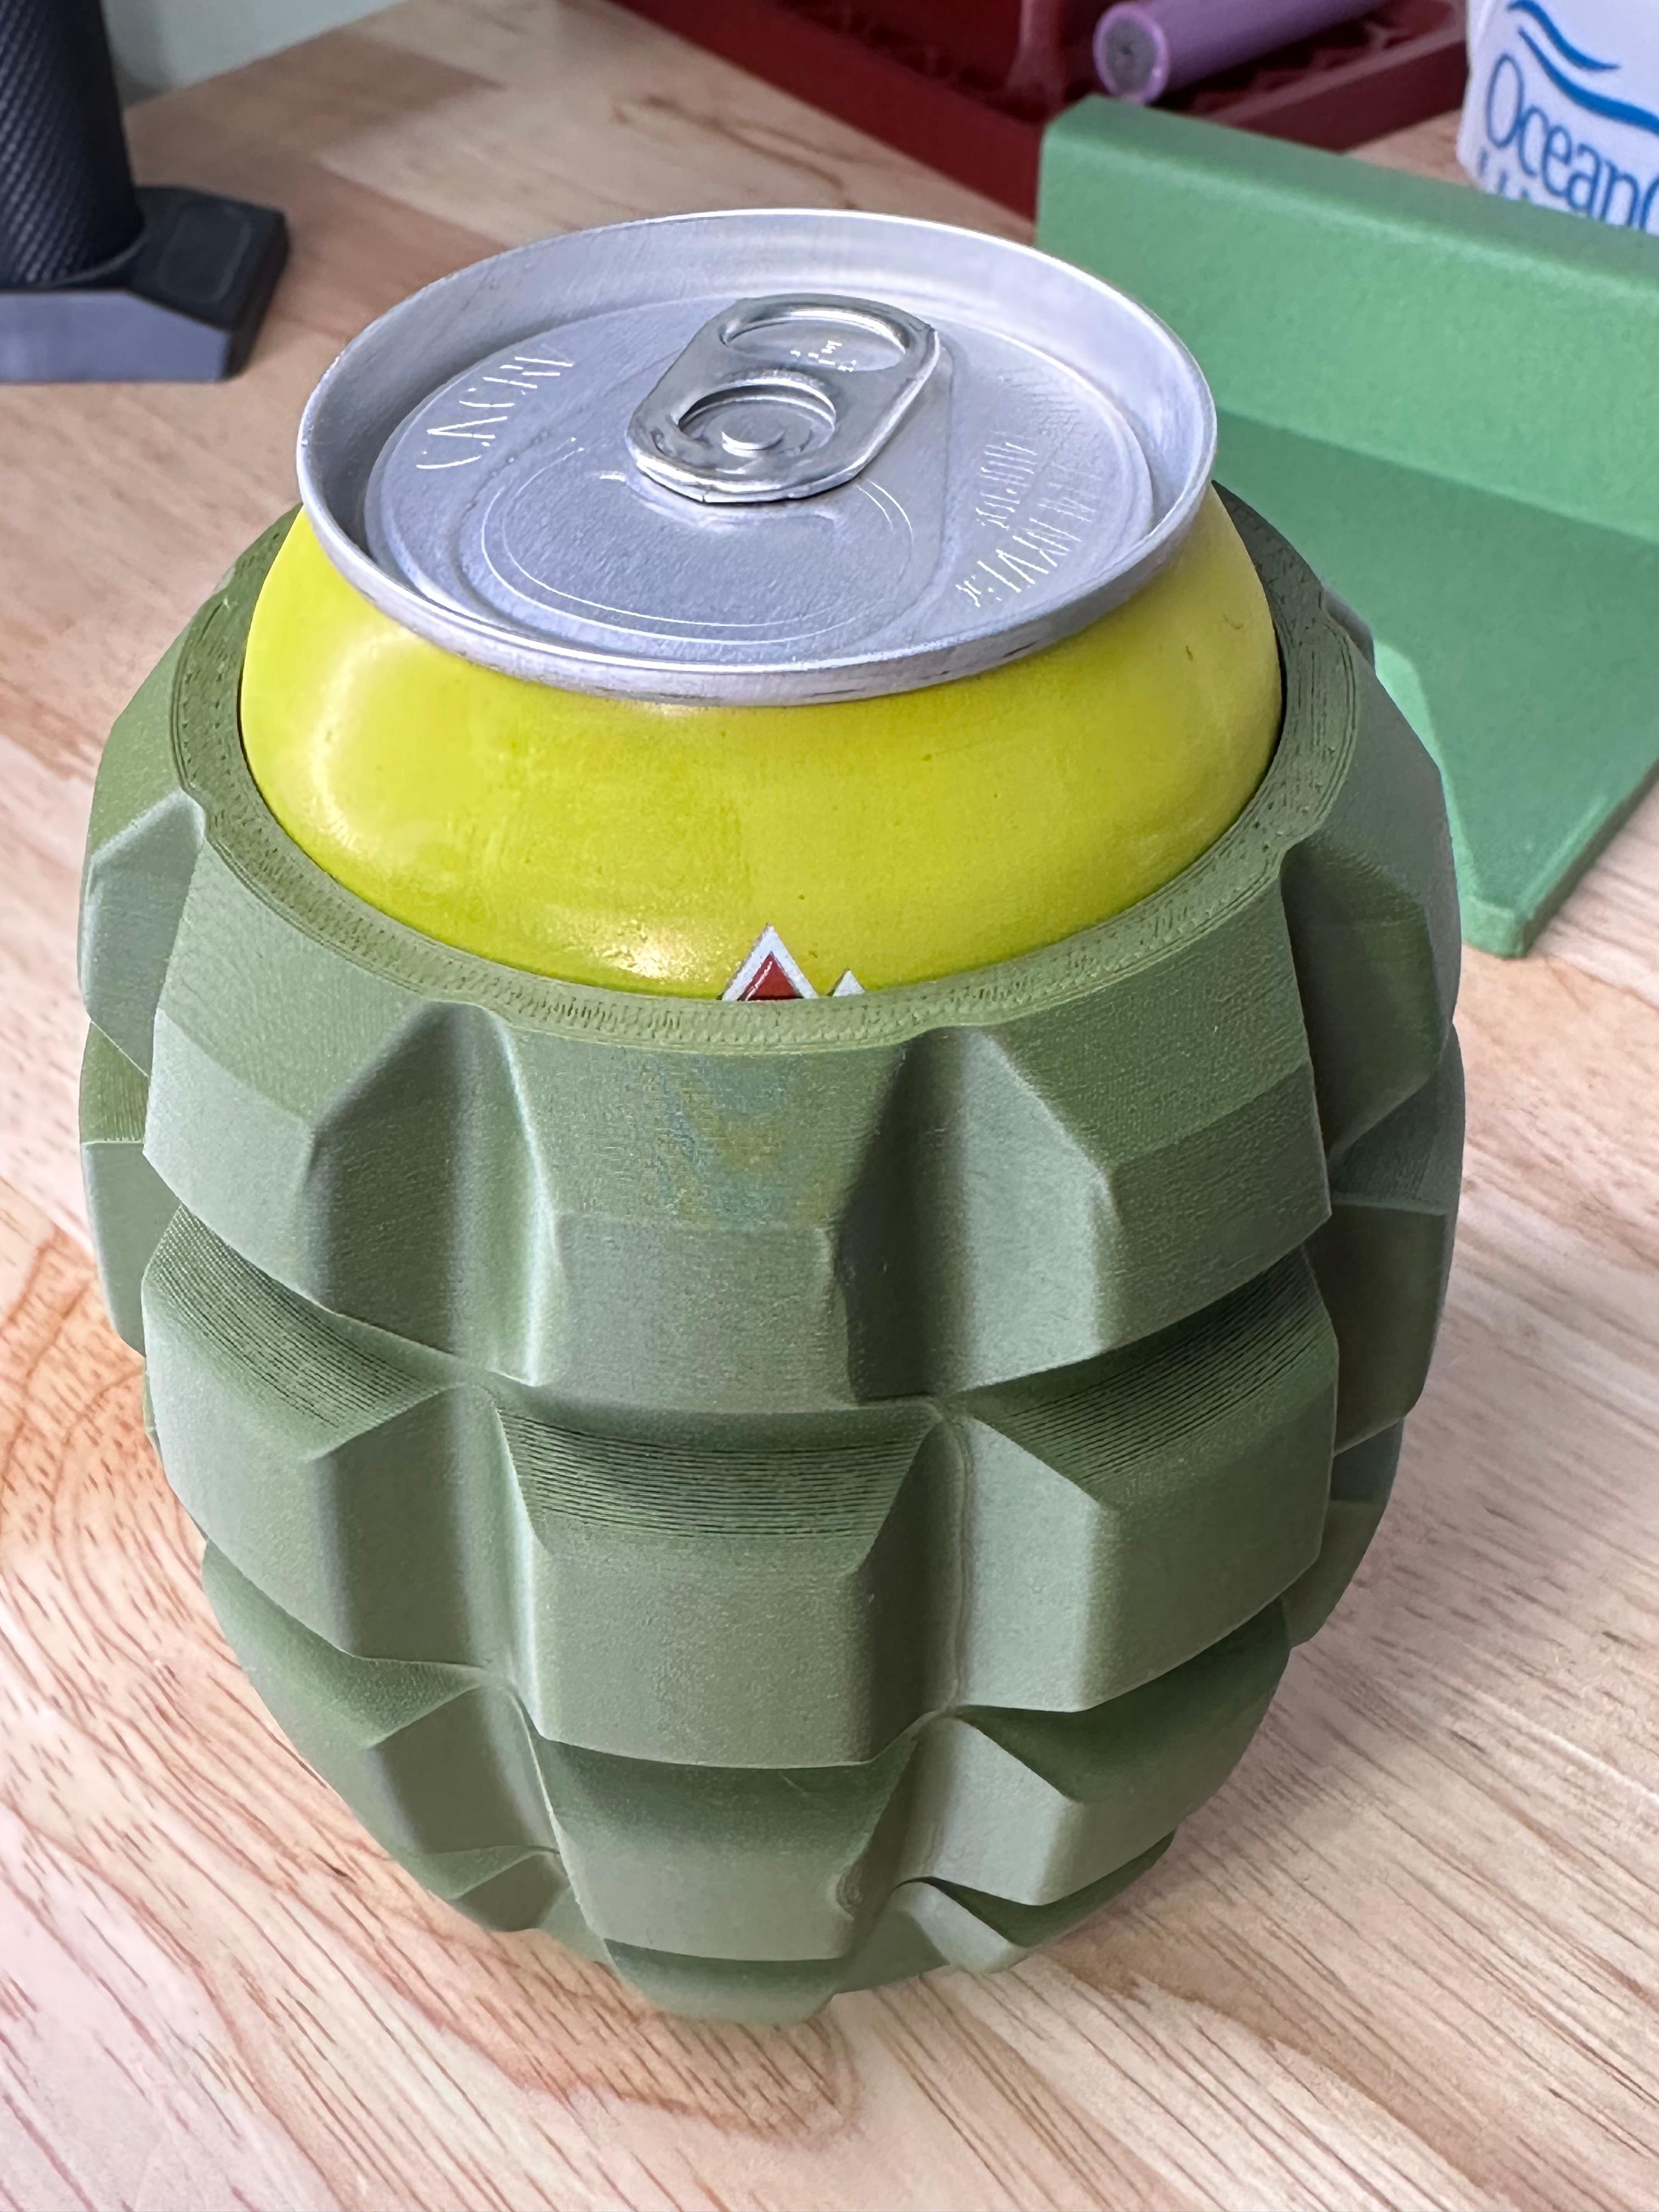 Pineapple Grenade Can Cup - An Explosive can cup to rule them all 3d model